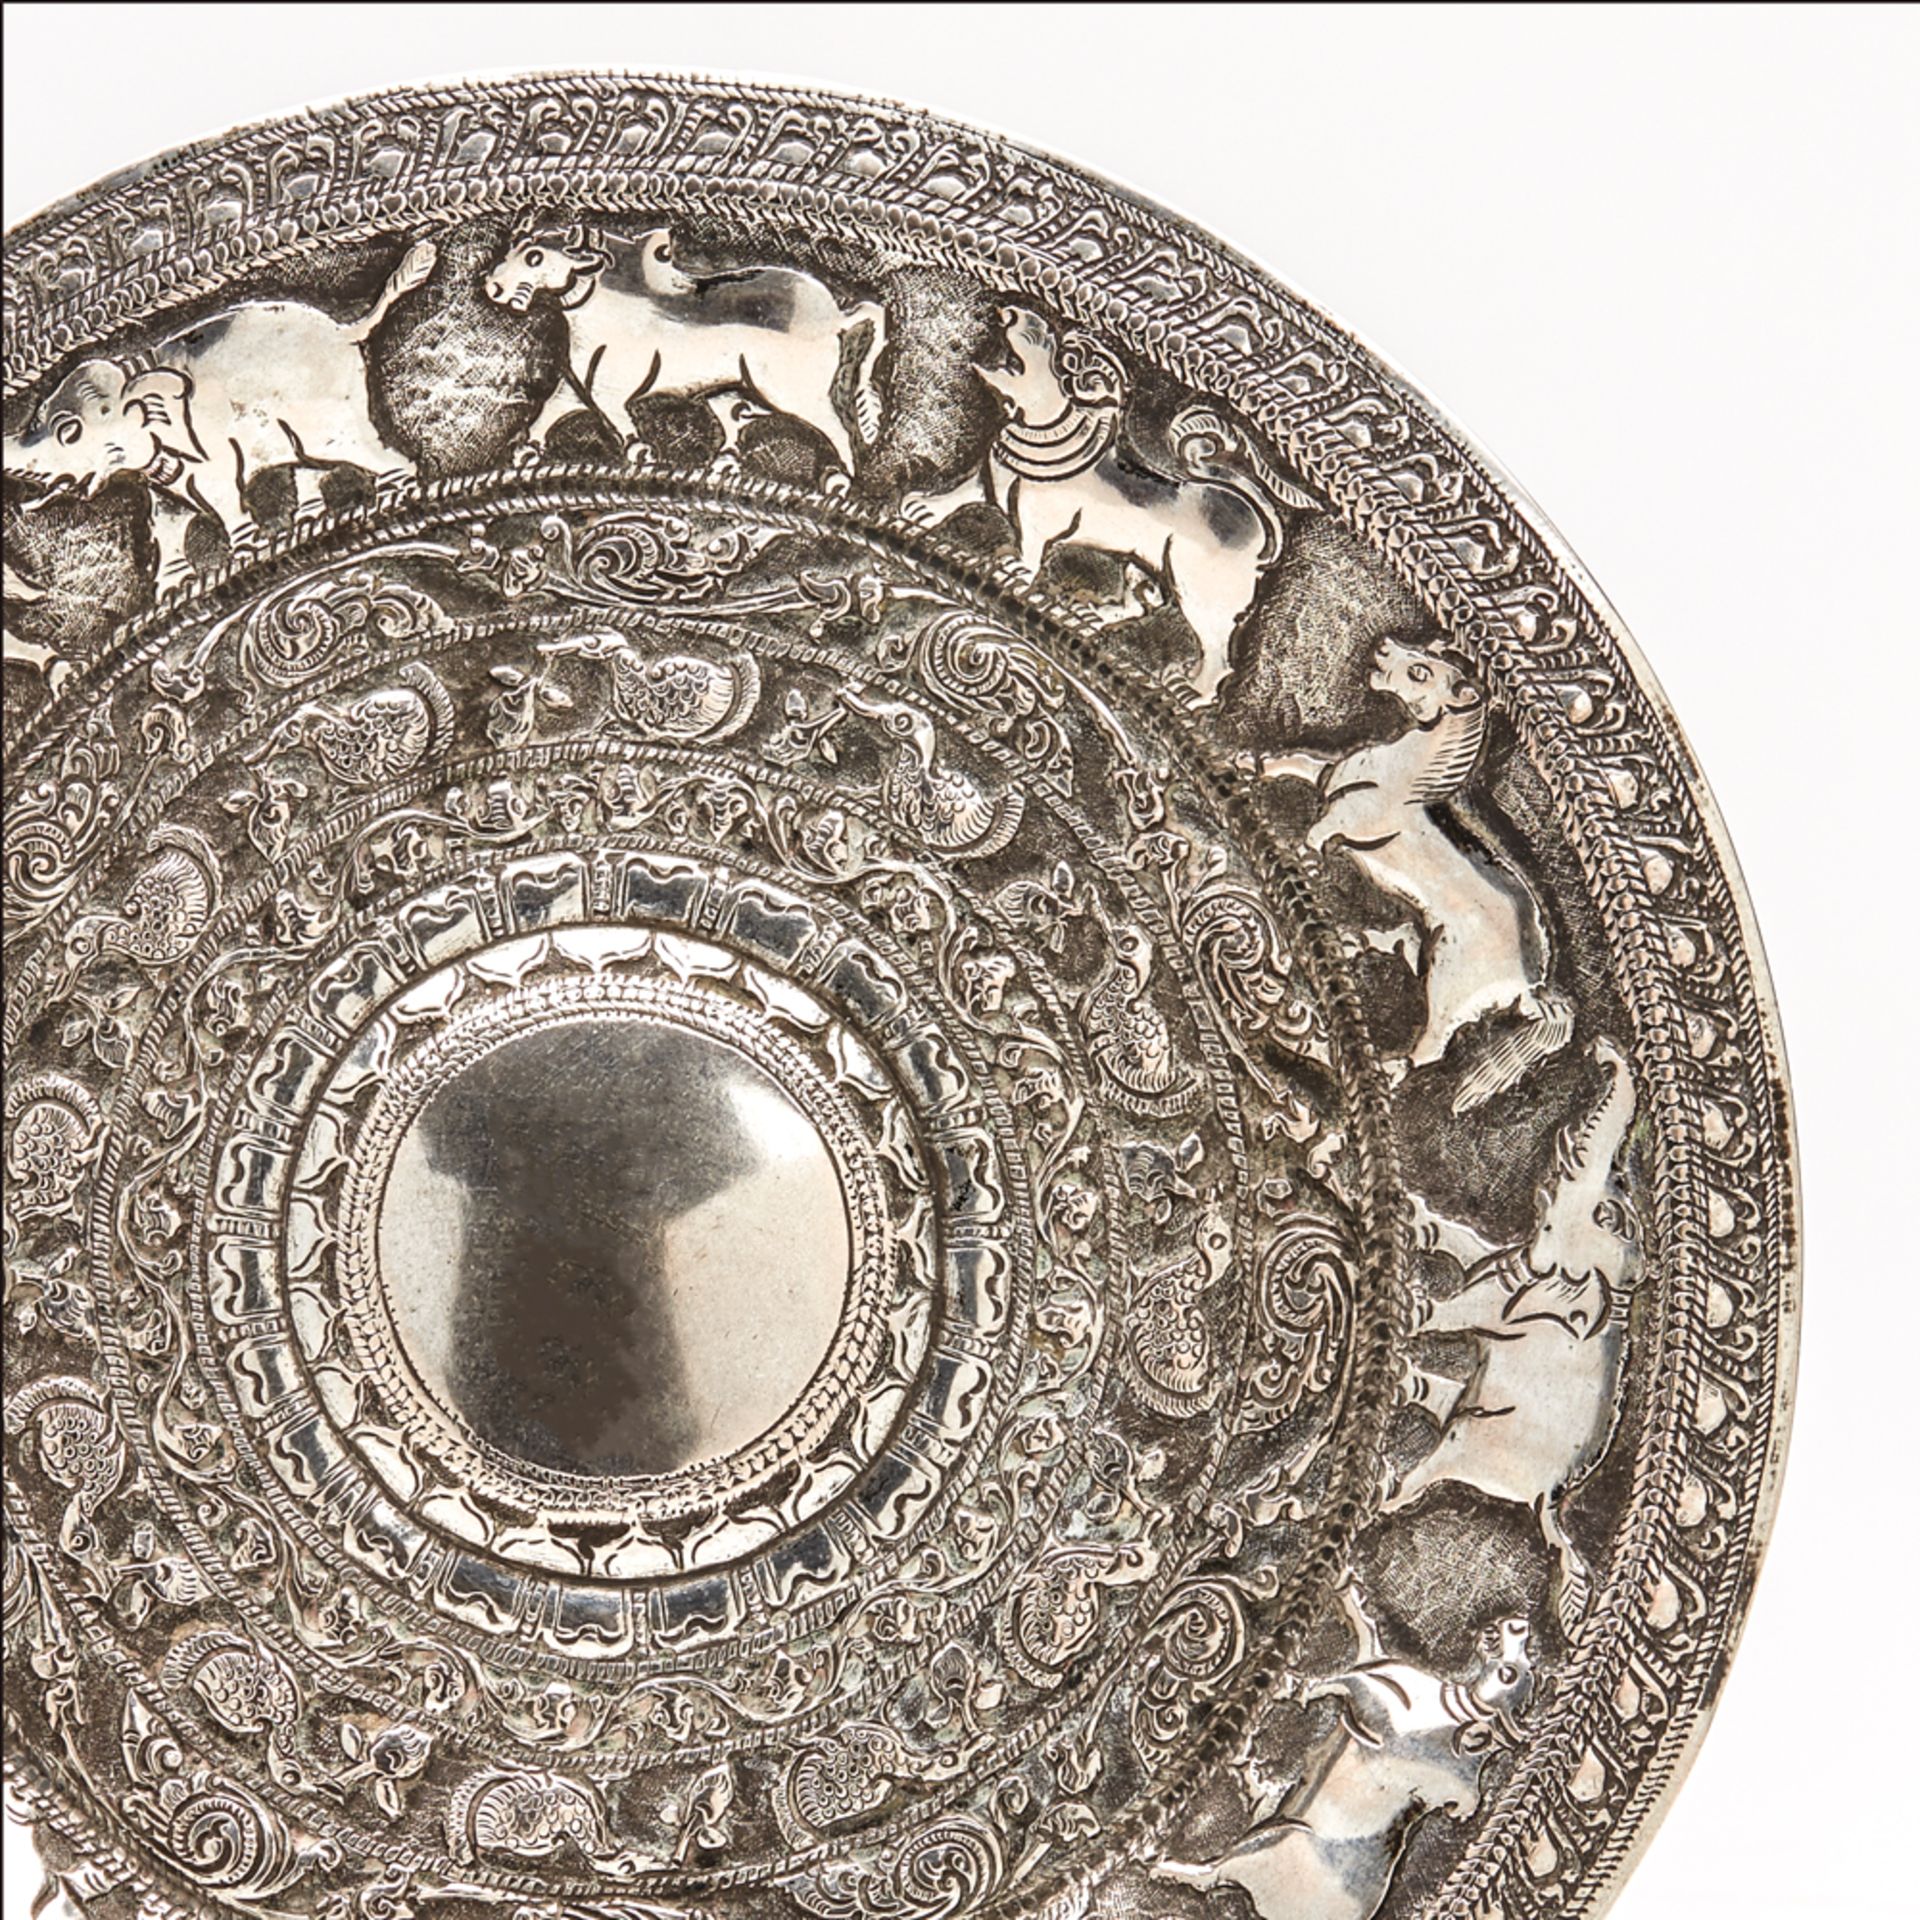 Fine Antique Indian Silver Metal Dish With Animals 19Th C. - Image 4 of 4